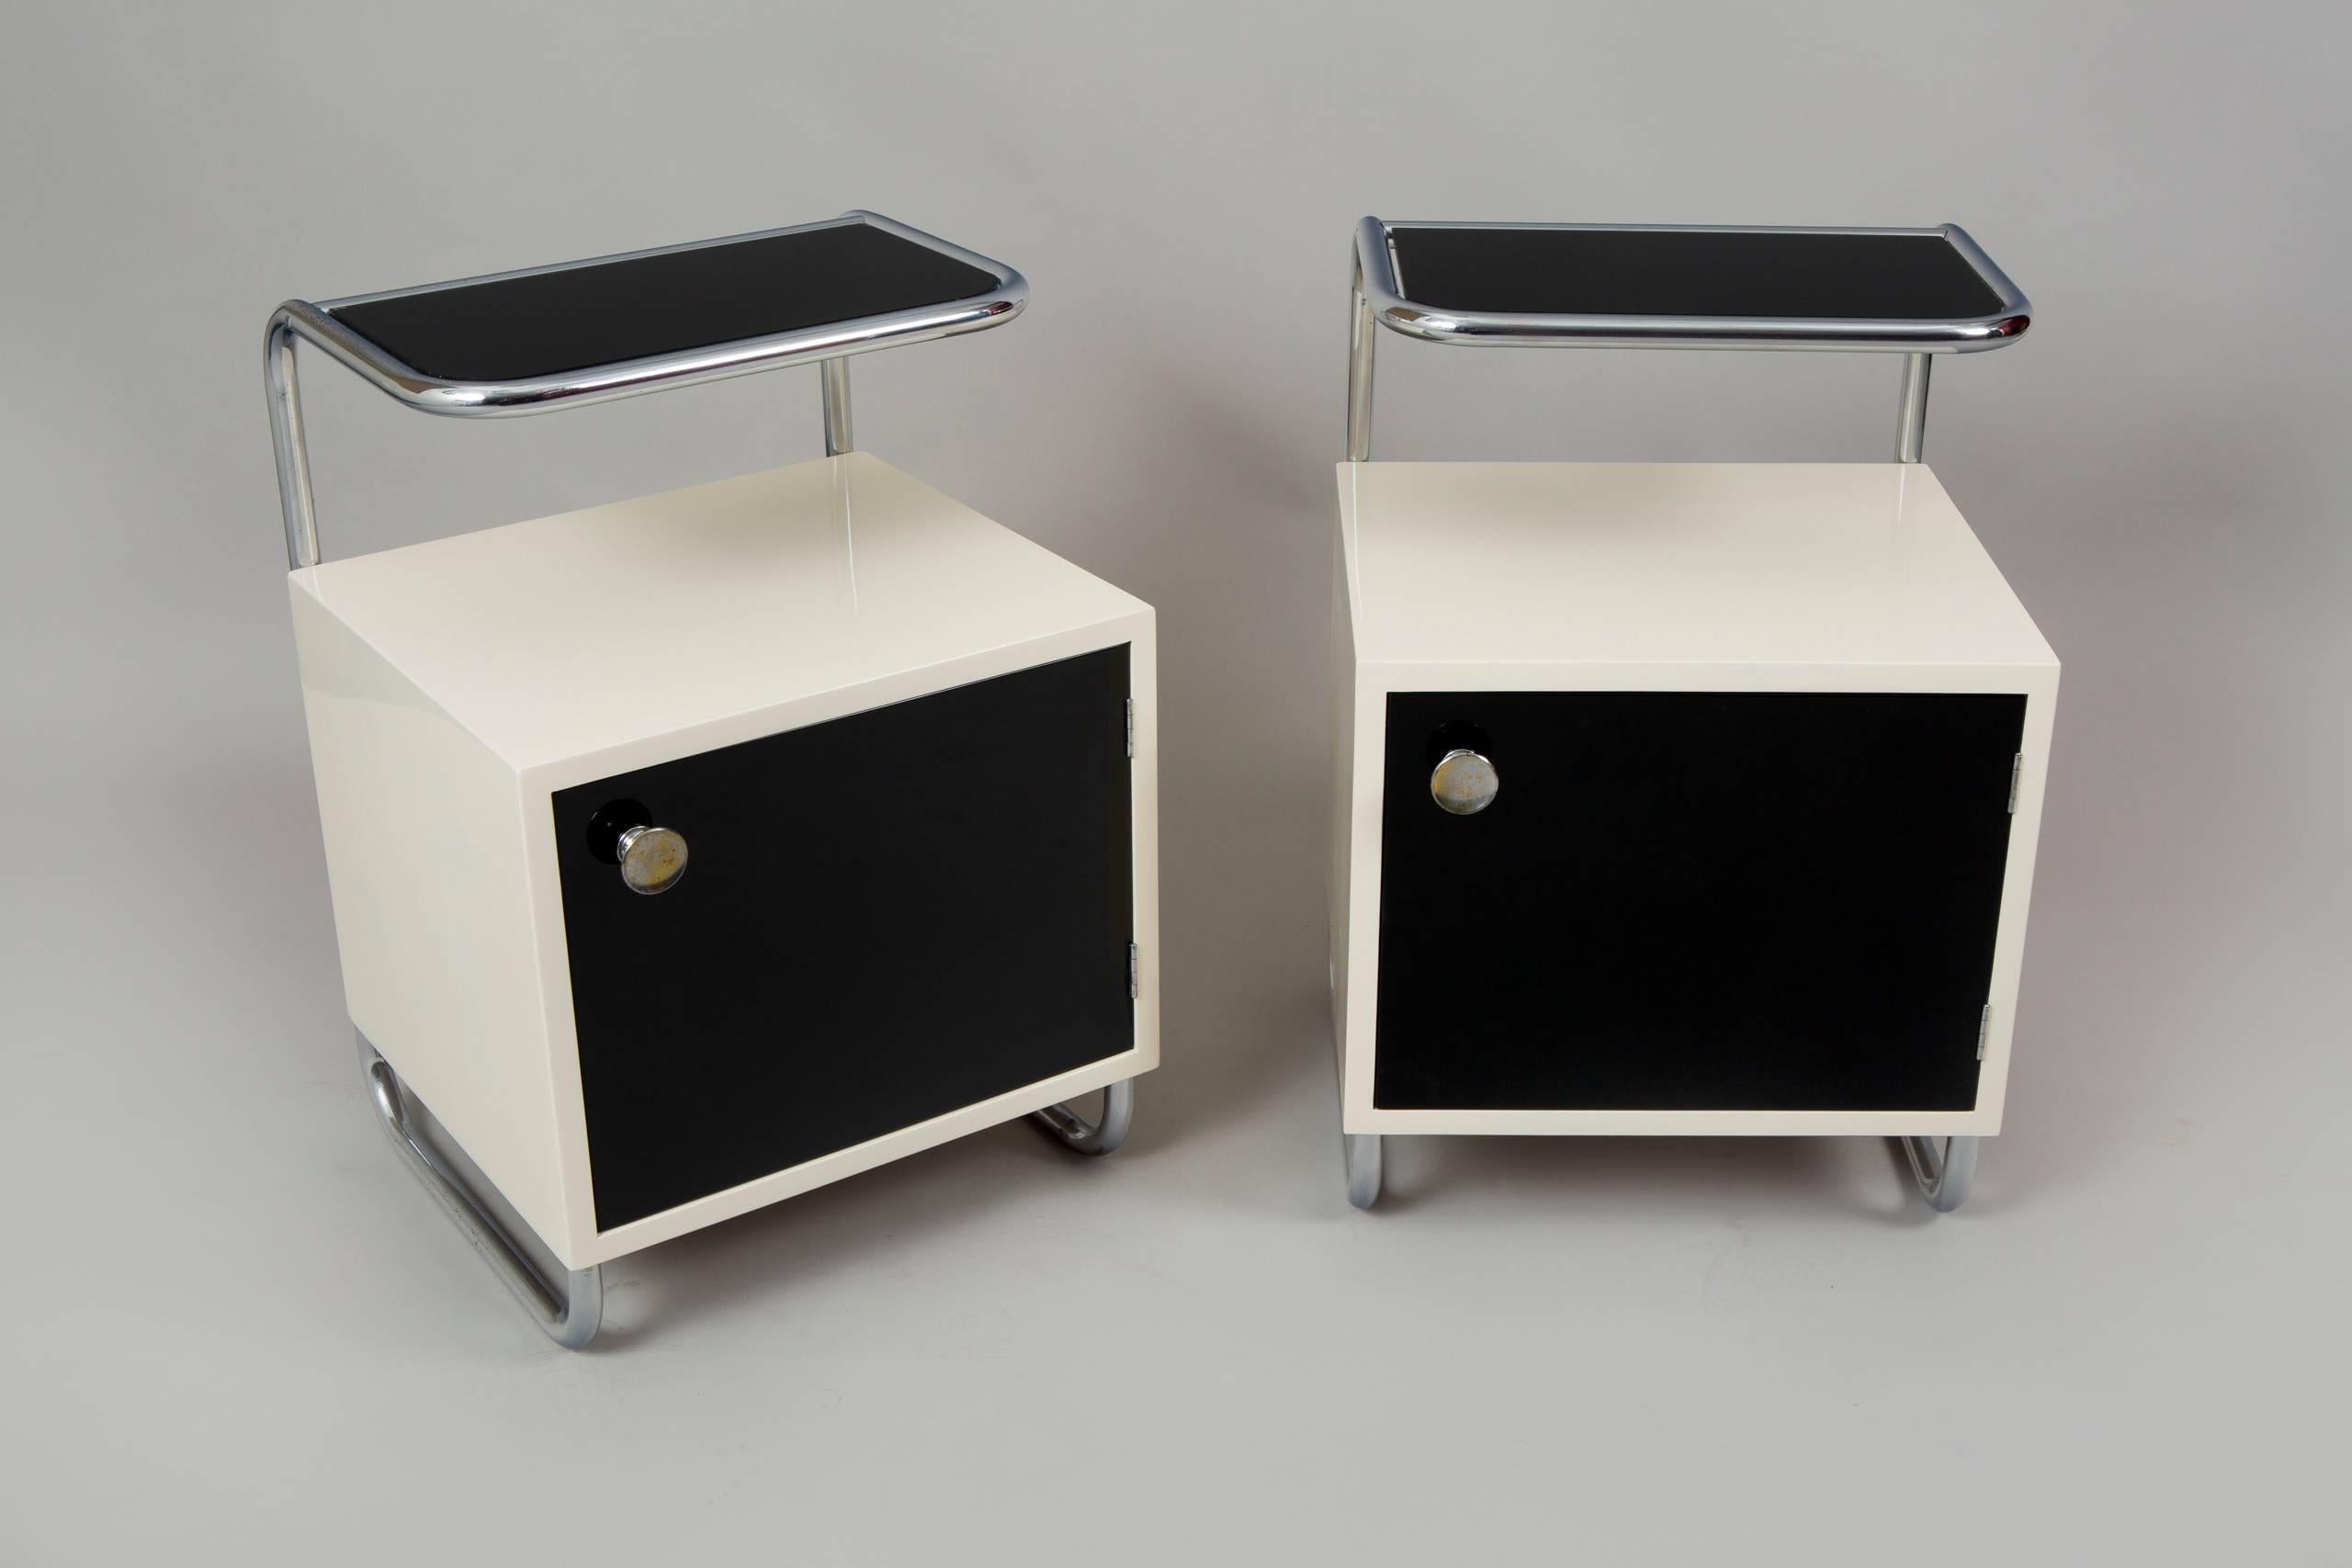 Pair of Art Deco bed-side tables from Czech Republic.
Completely restored, surface polished by piano lacquers.

Maker: Vichr a spol.

We guarantee safe a the cheapest air transport from Europe to the whole world within 7 days.
The price is the same